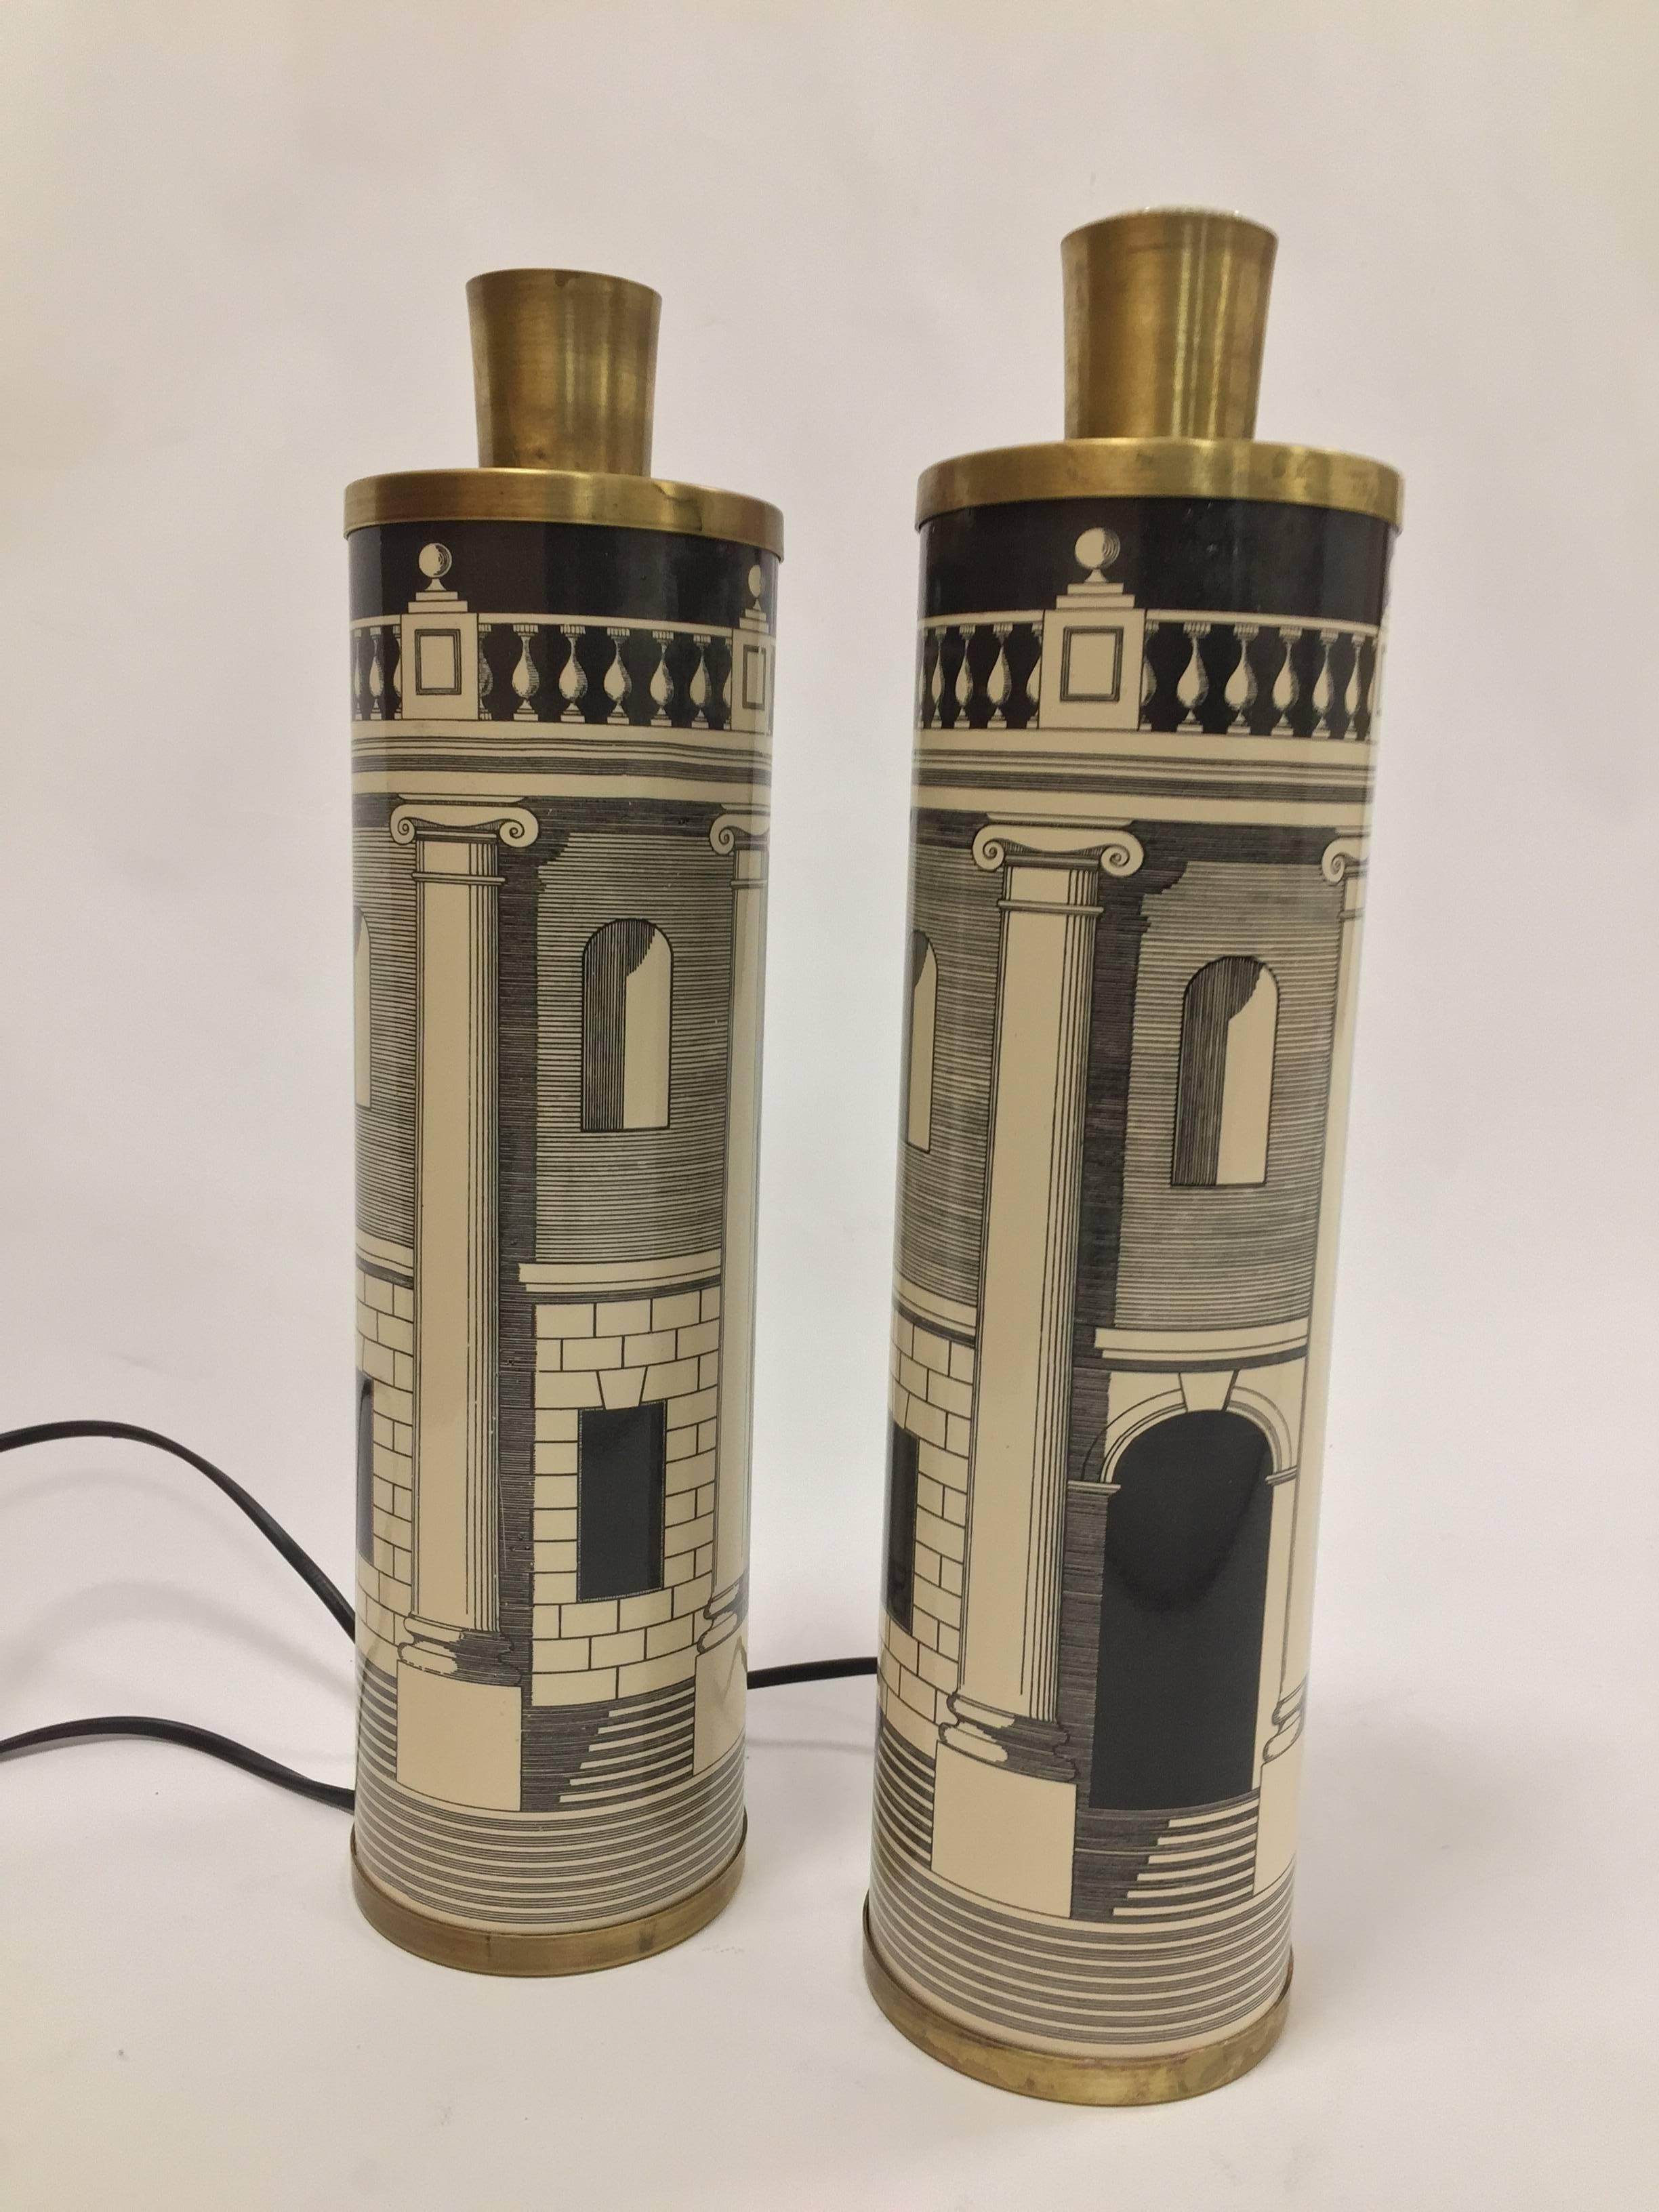 Pair of 1970s enameled metal and brass Fornasetti Palladia lamps
Good vintage condition.